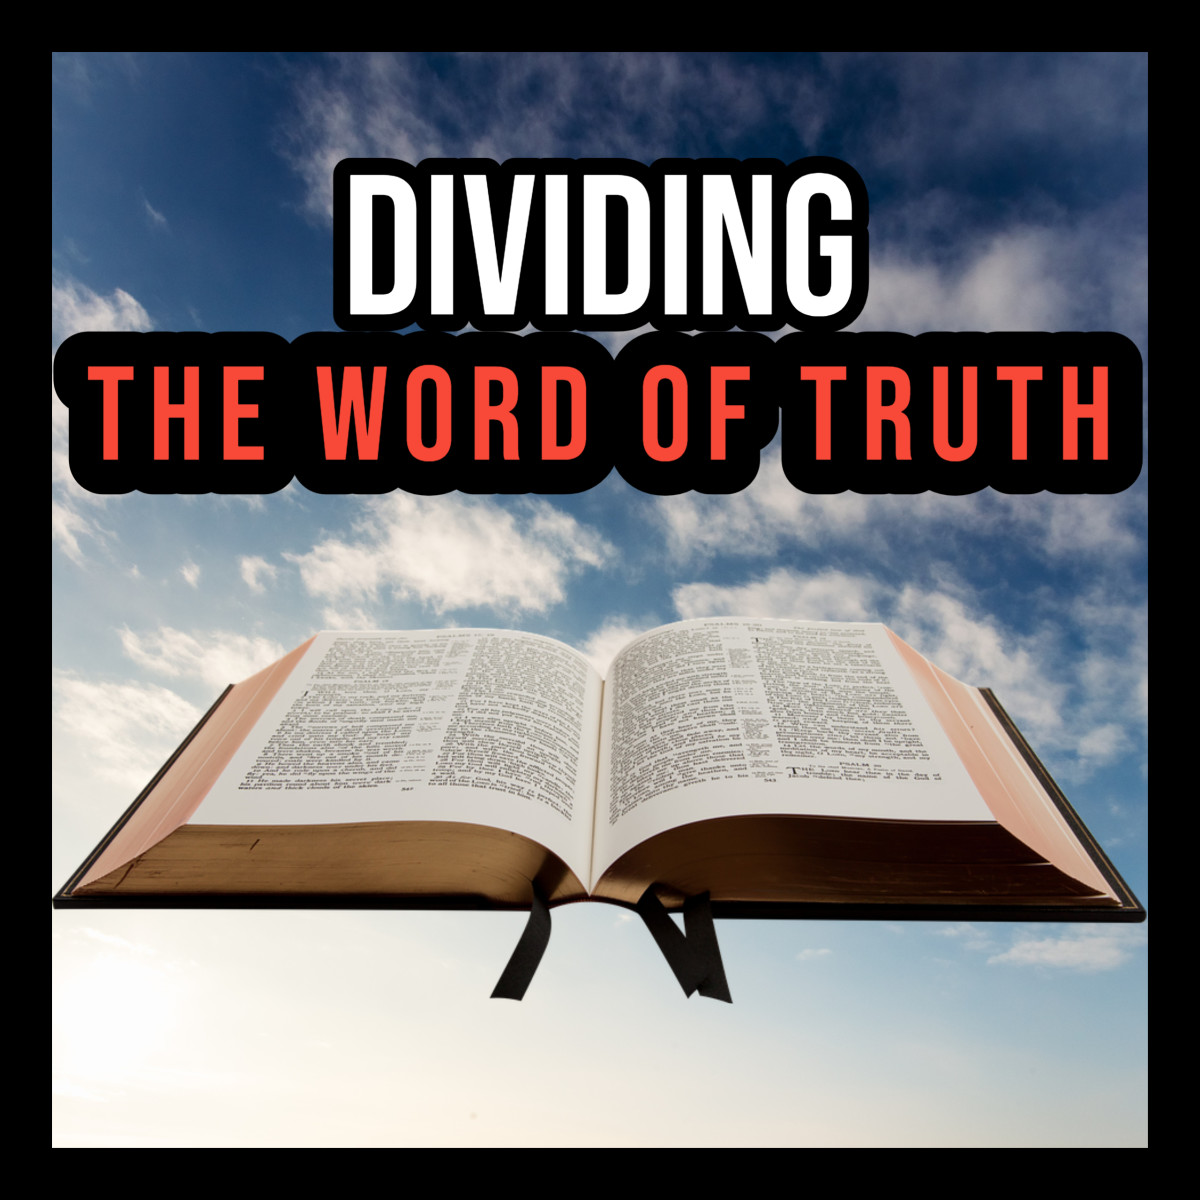 How do I "divide" the Word of Truth properly?